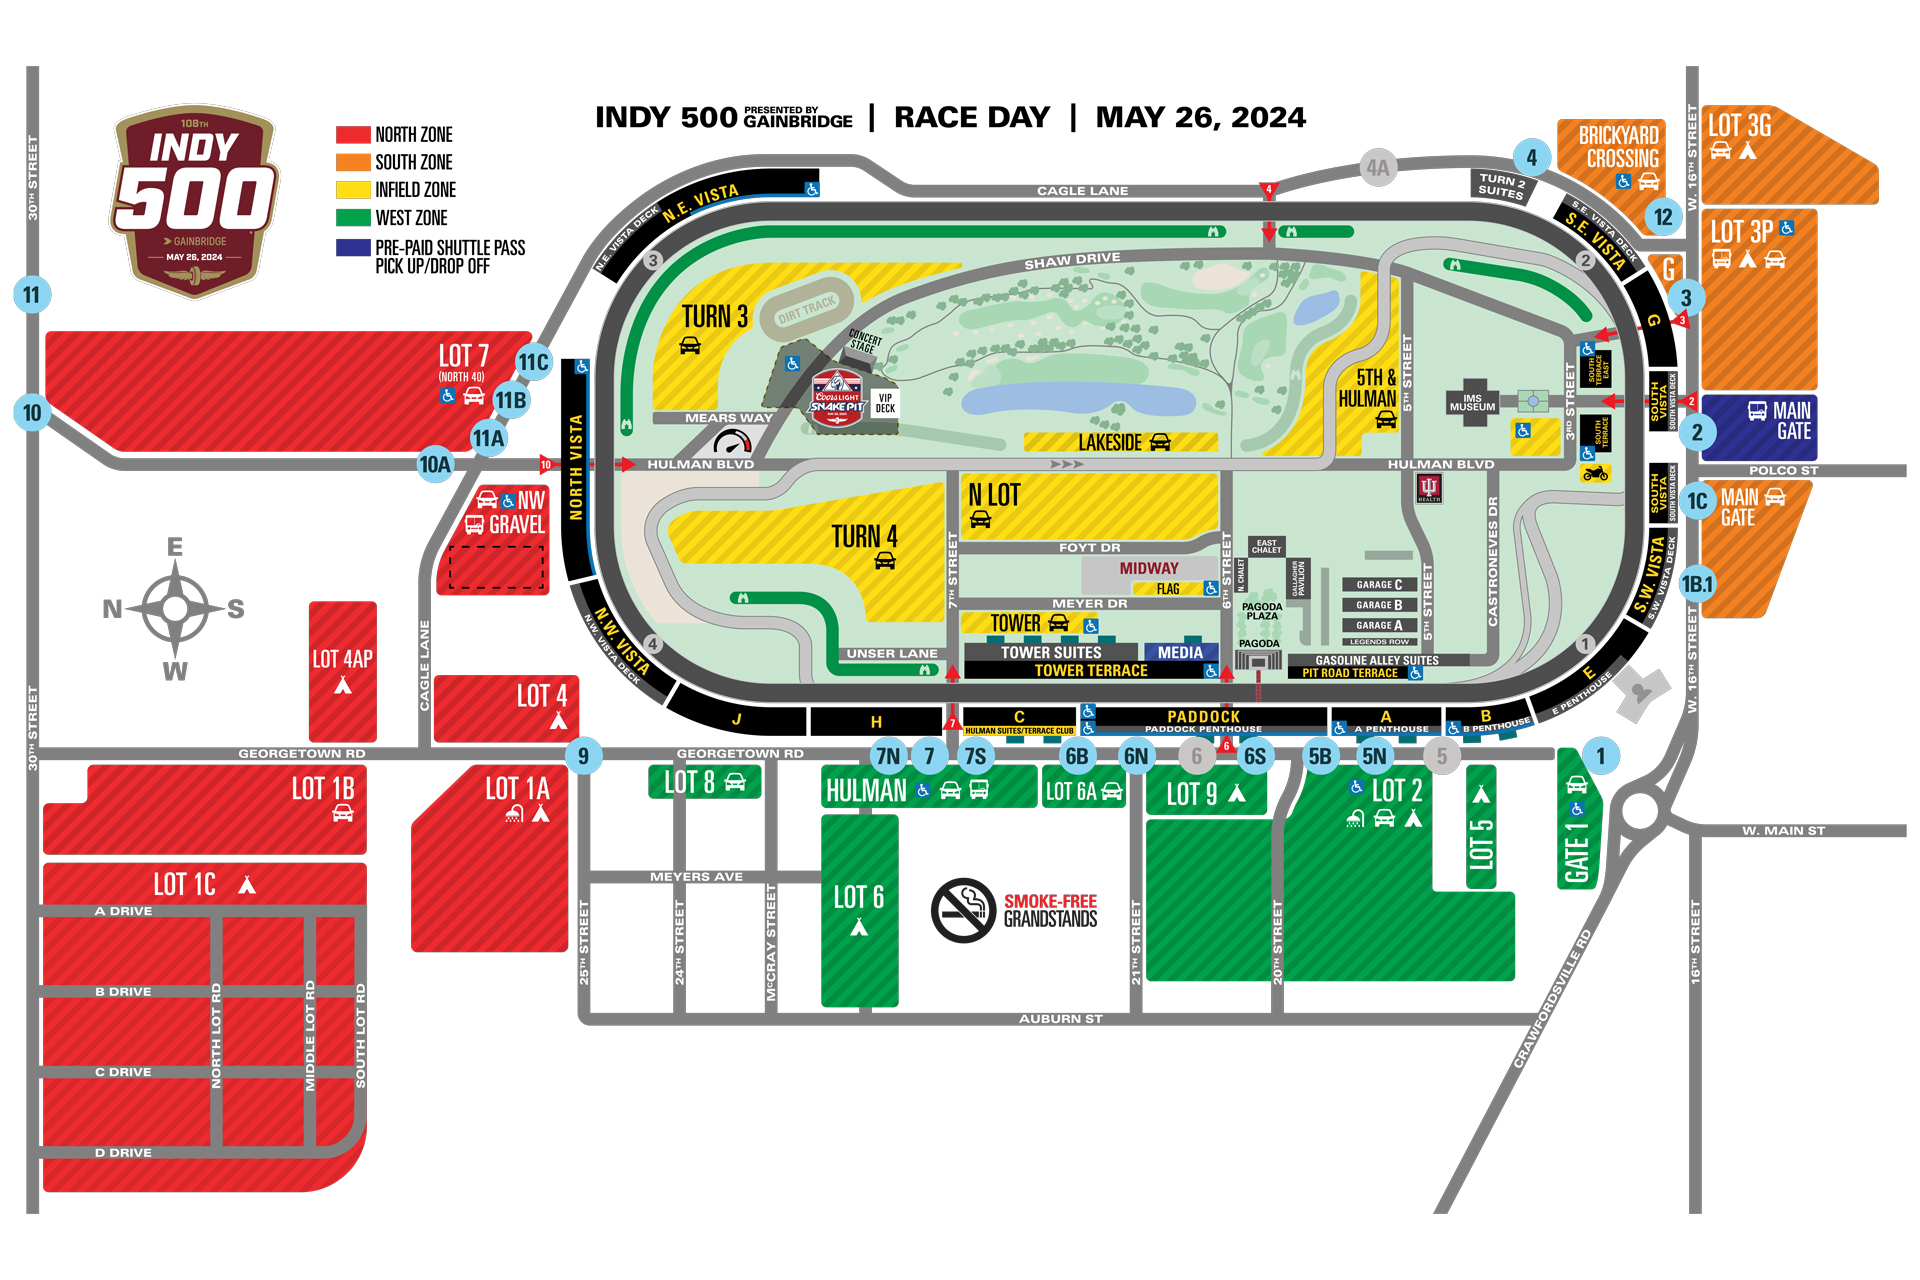 on-site parking map for the Indy 500 raceway and the Corvano event